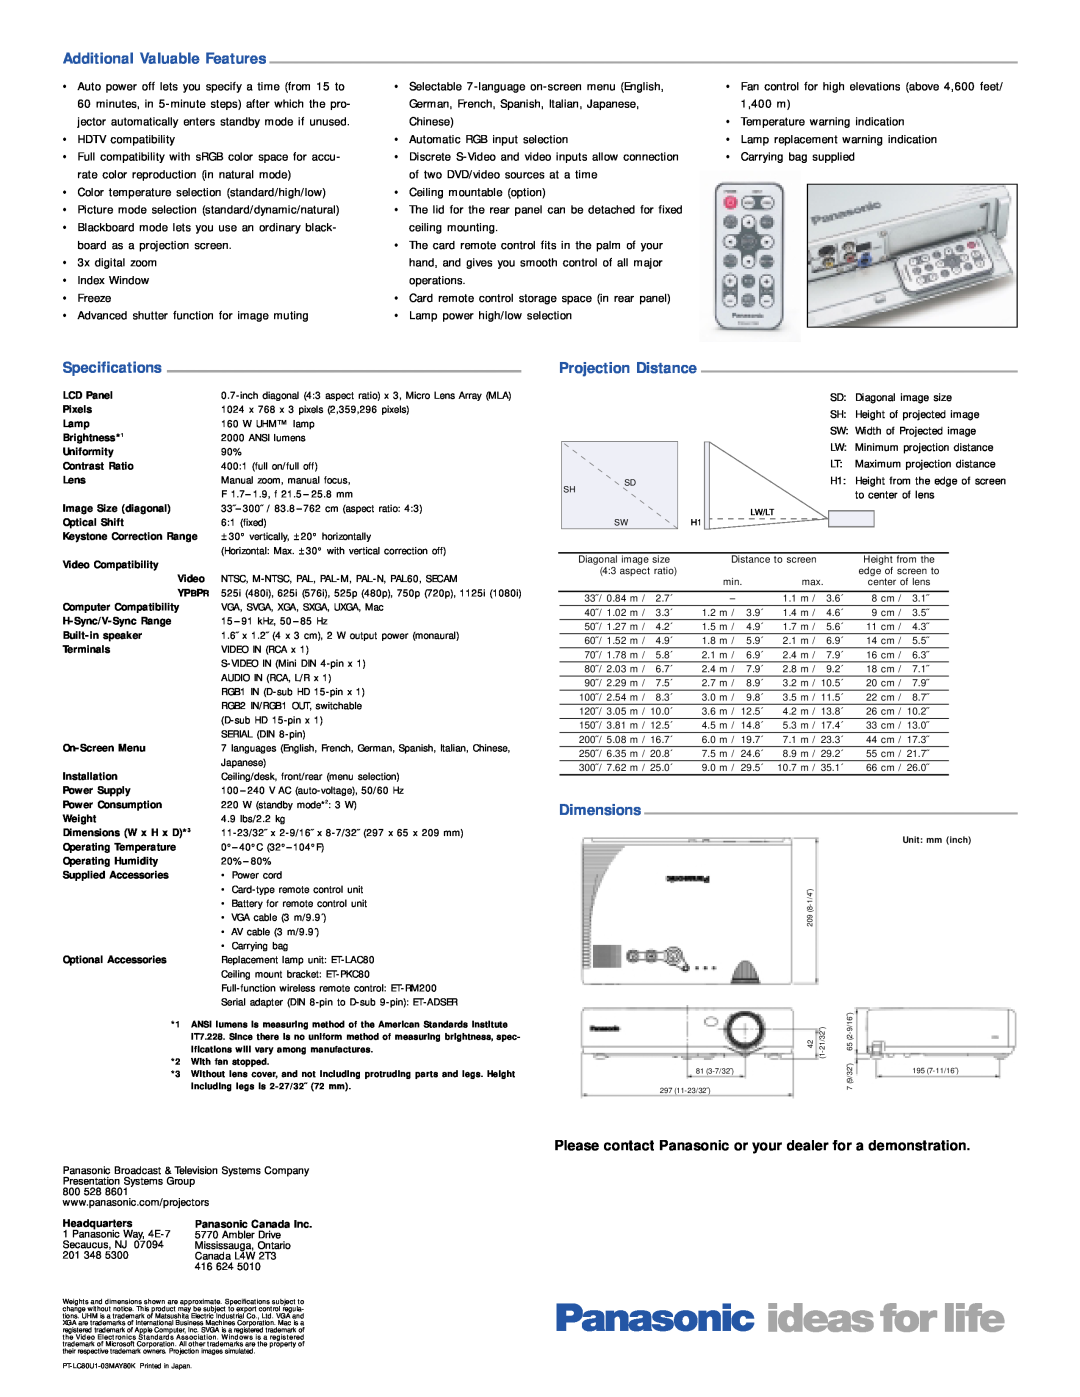 Panasonic PT-LC80U manual Additional Valuable Features, Specifications, Projection Distance, Dimensions 